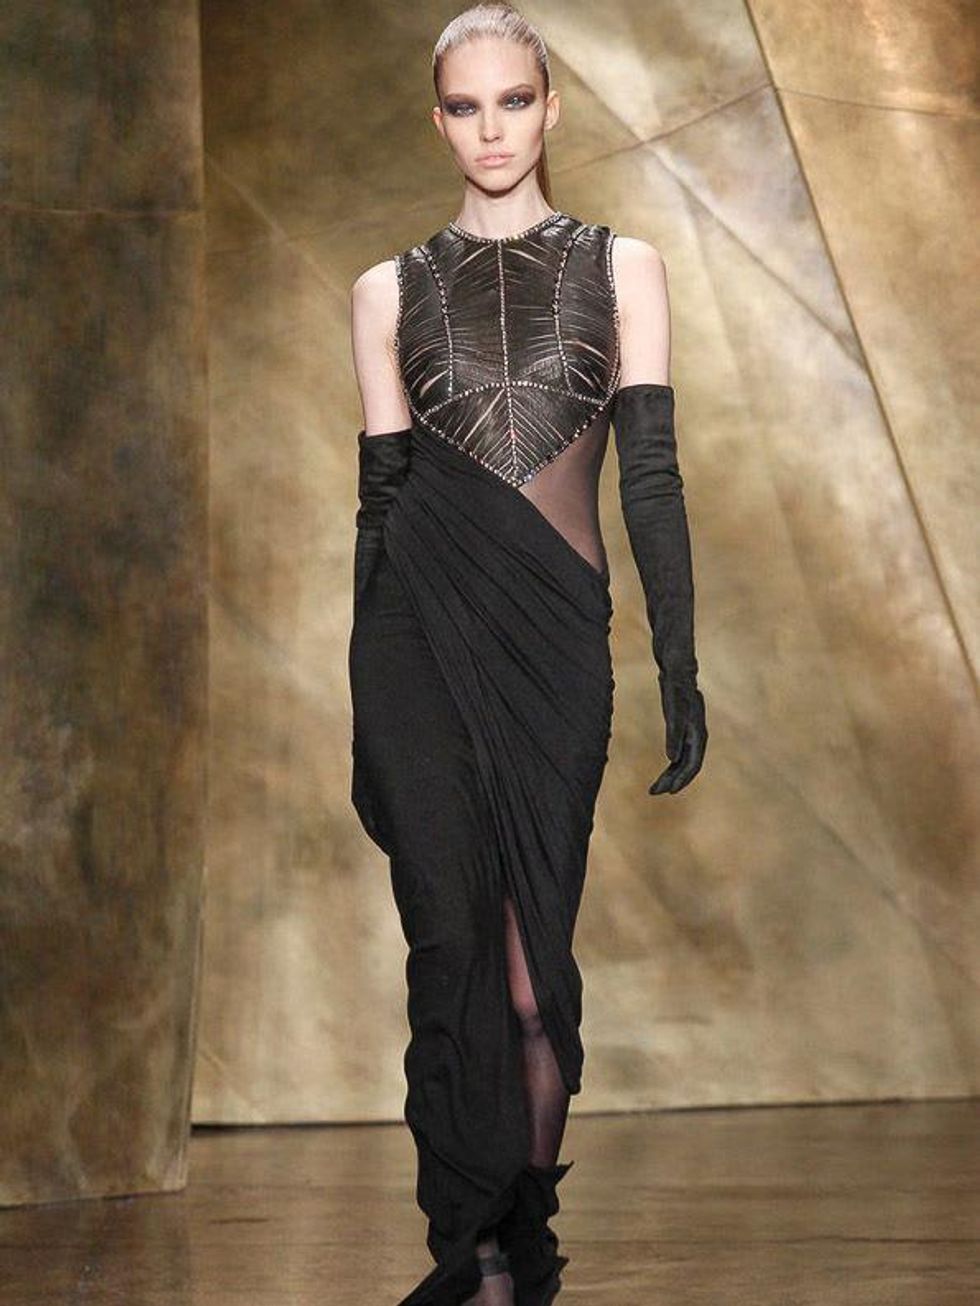 Cape 'n drape: Donna Karan shows her savage, sensual side in collection  that returns to her roots - CultureMap Houston